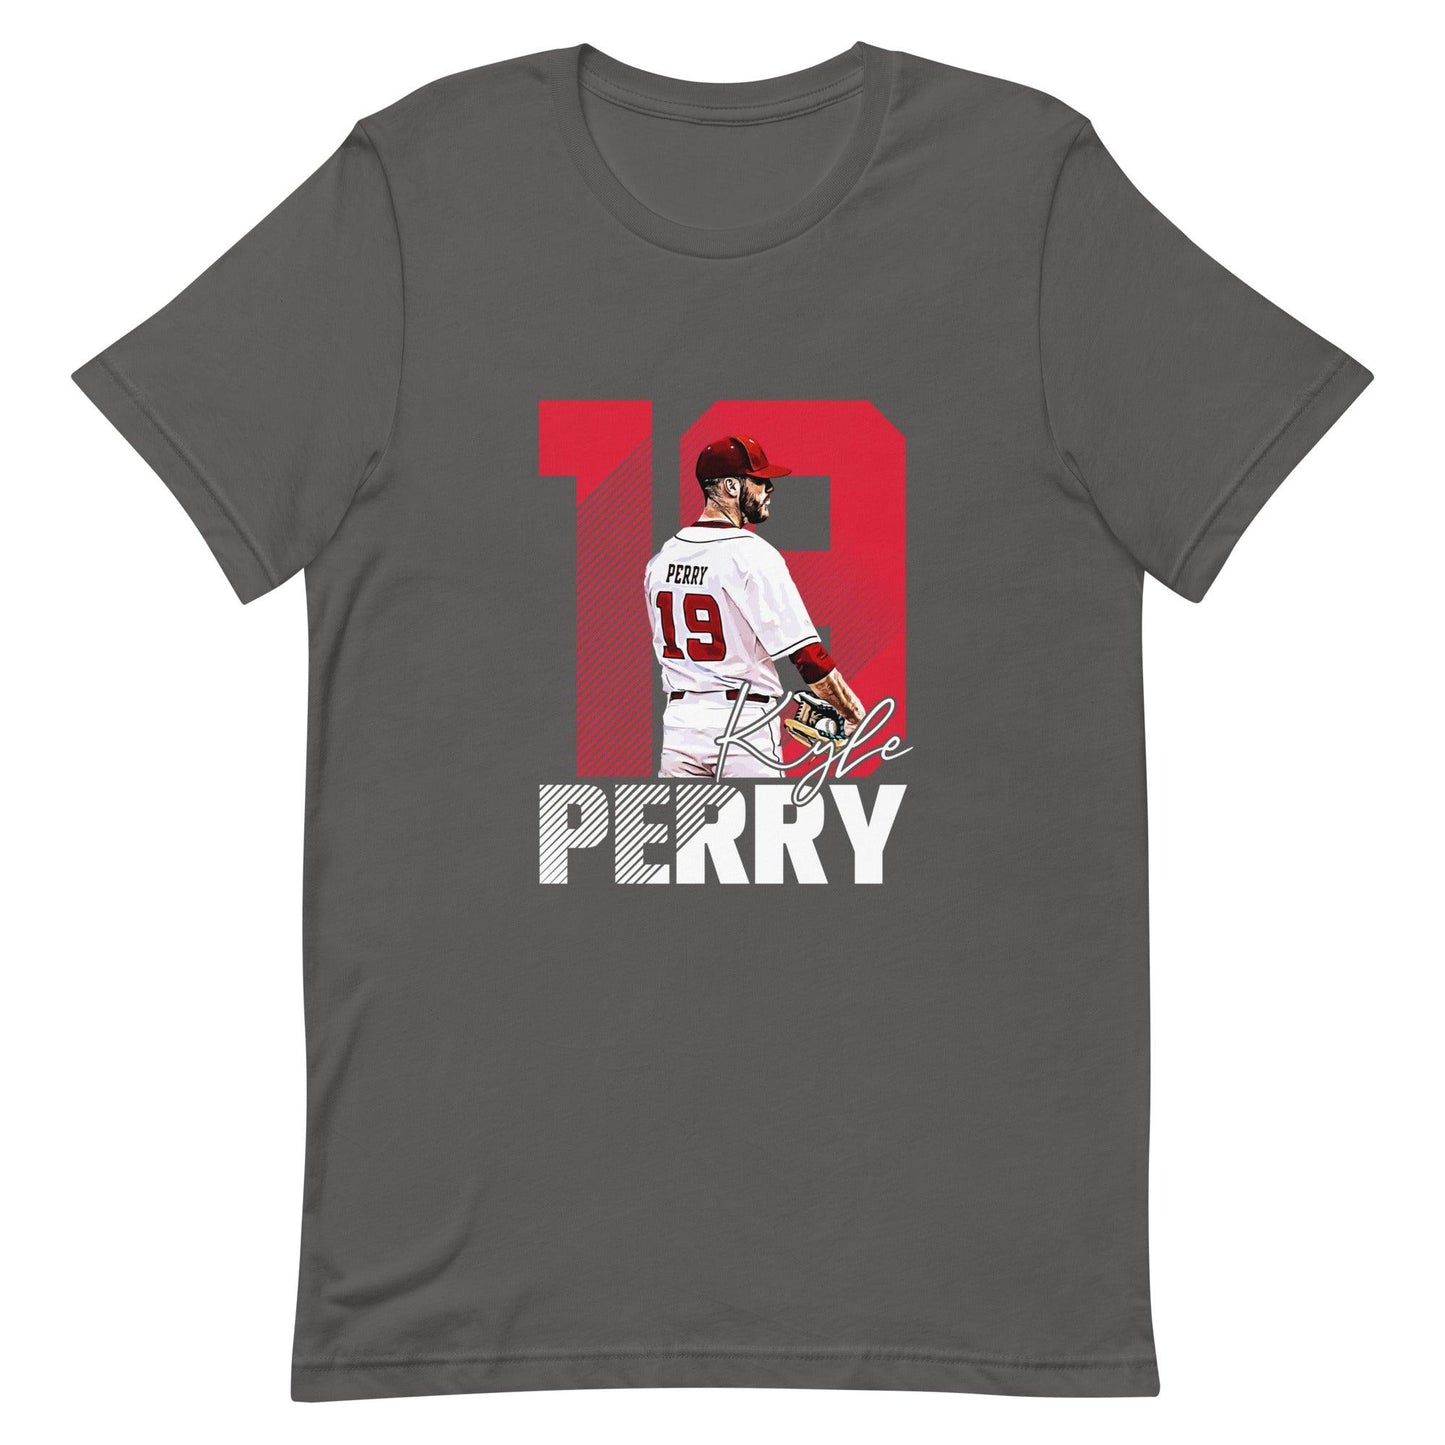 Kyle Perry "Gameday" t-shirt - Fan Arch